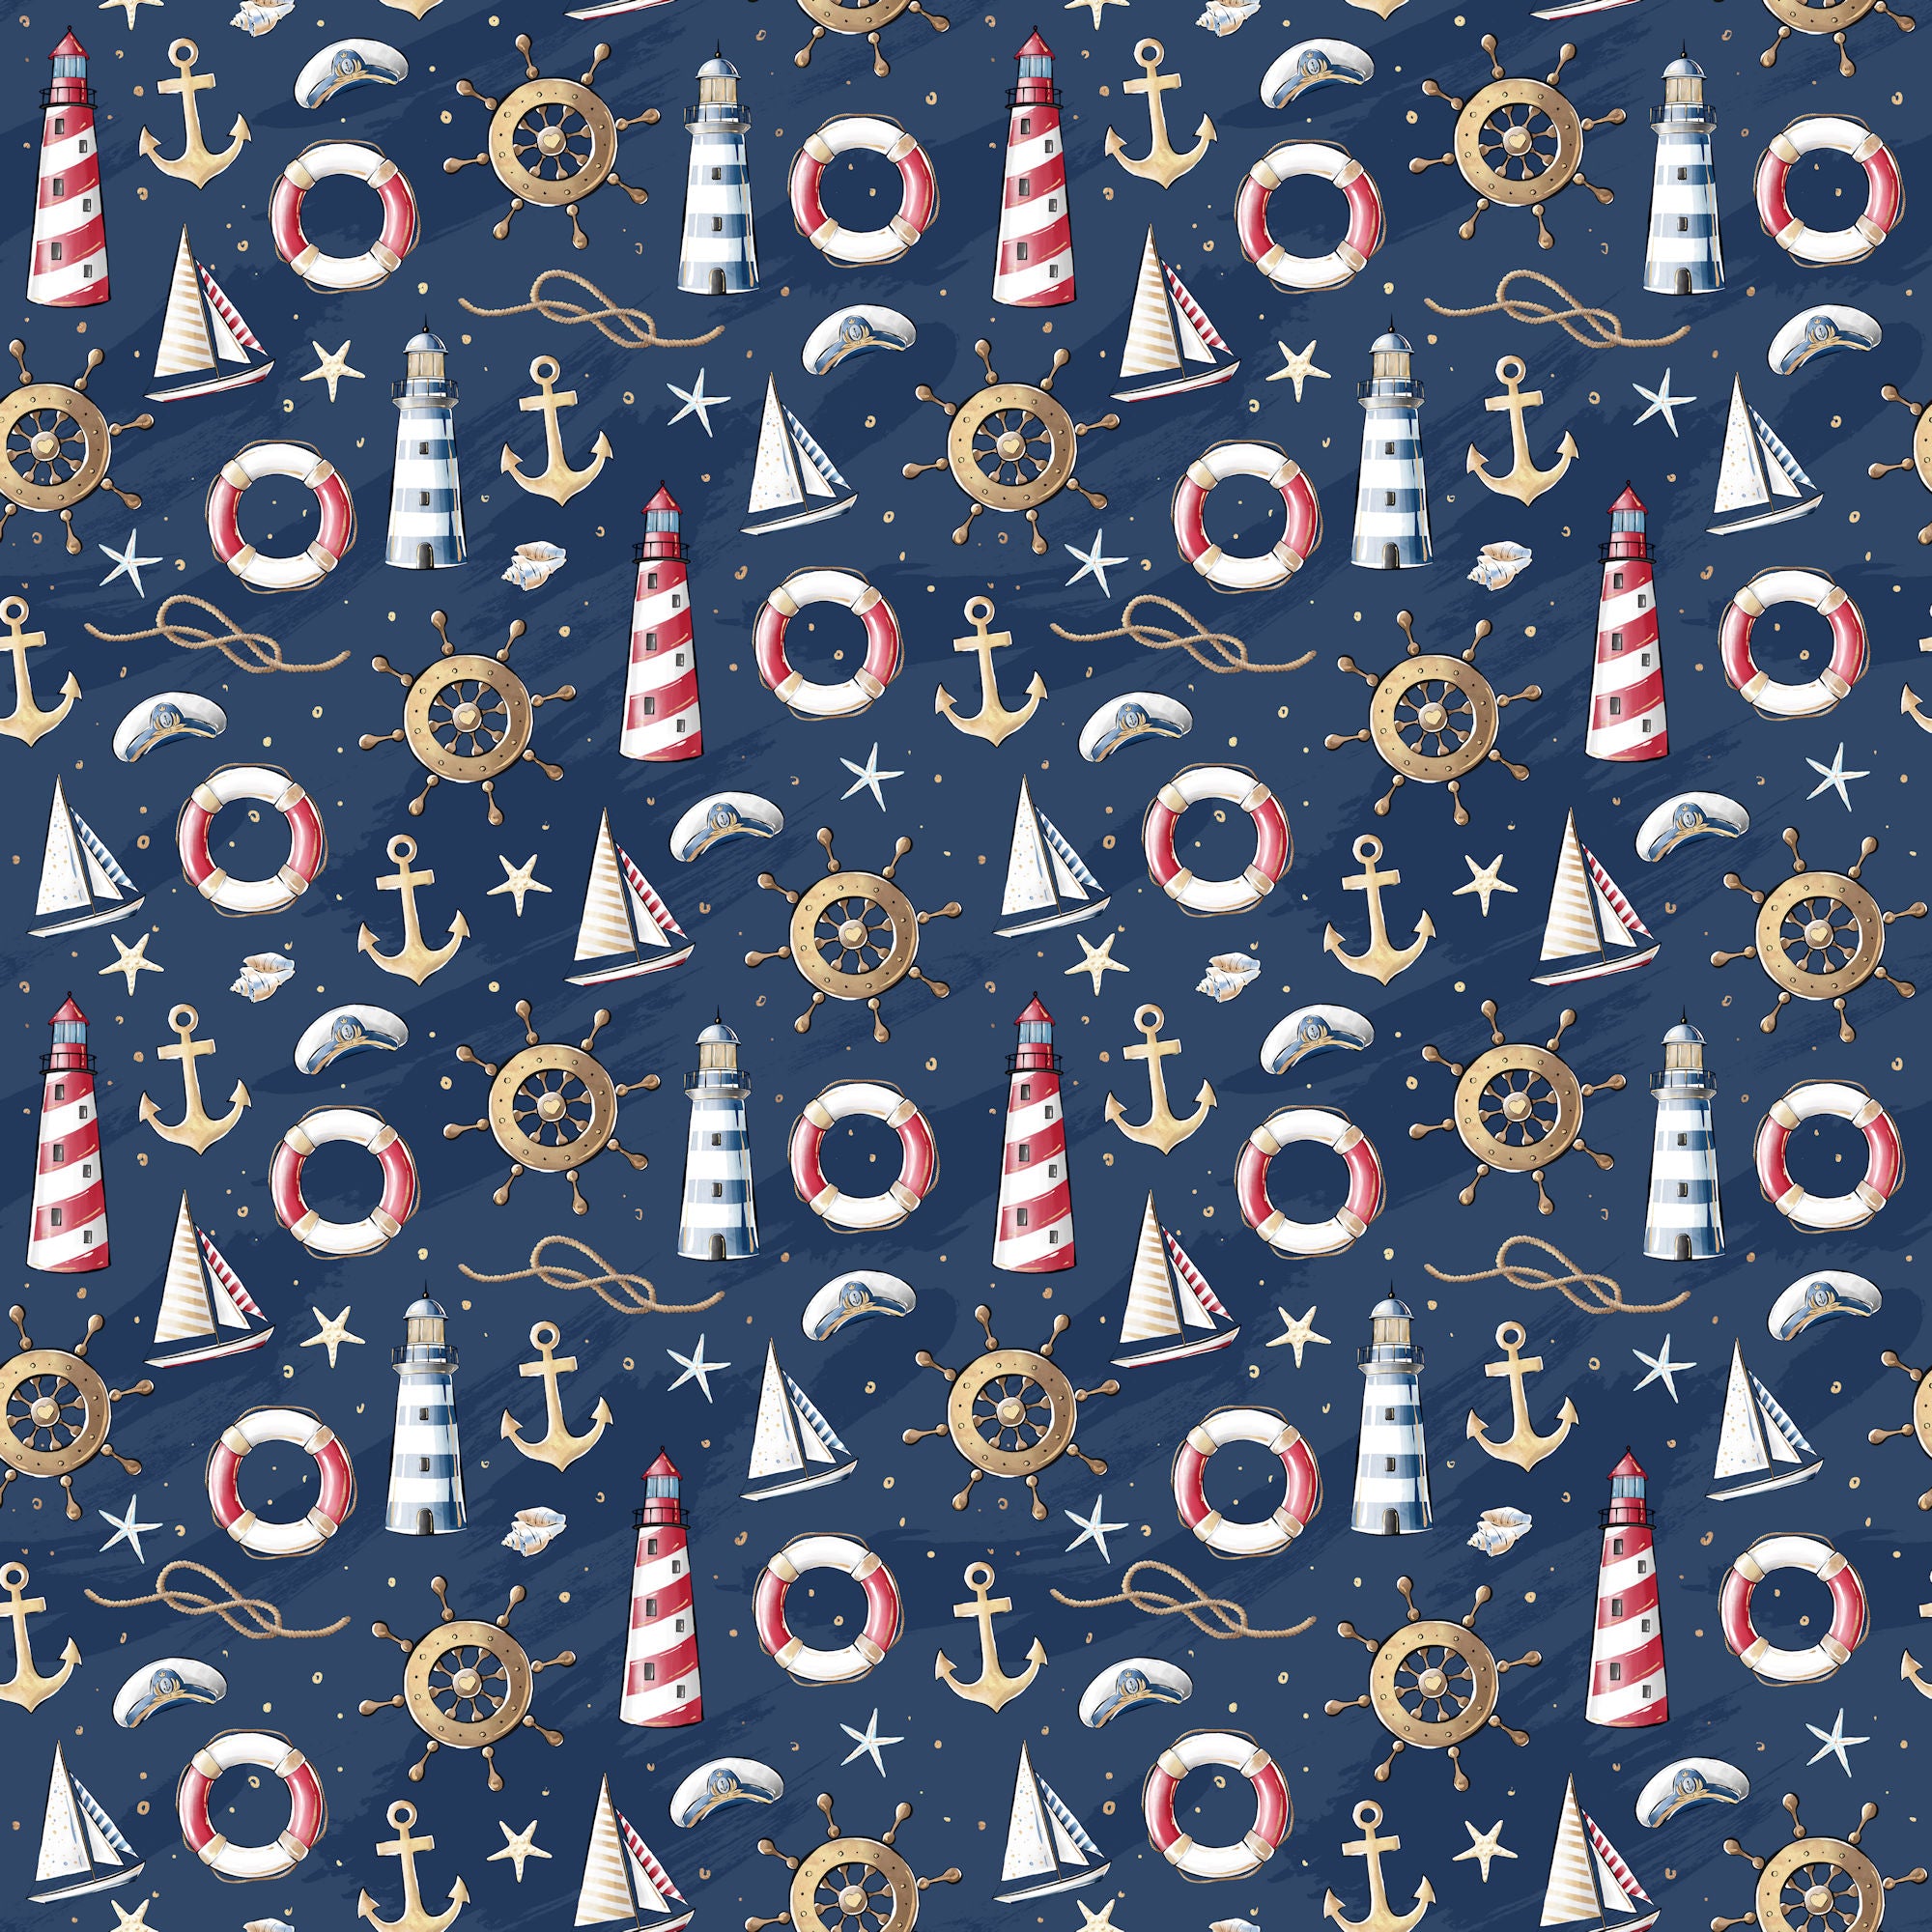 Nautical Summer Collection Oceanside Collage 12 x 12 Double-Sided Scrapbook Paper by SSC Designs